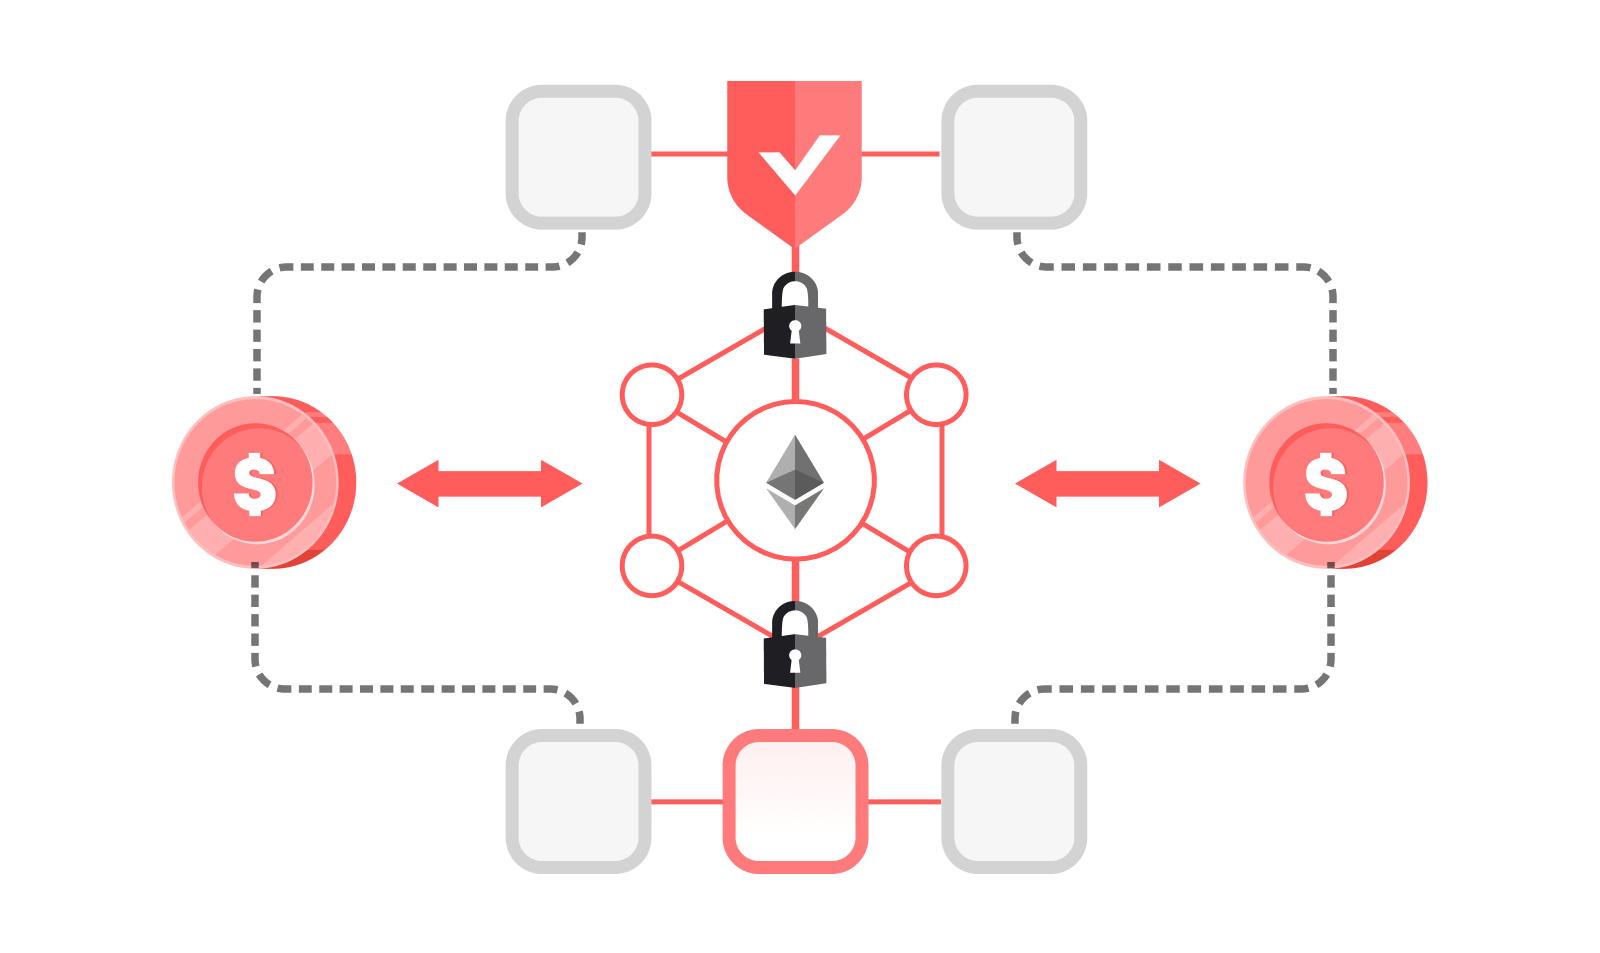 The ongoing evolution of account abstraction in Ethereum focuses on enhancing scalability, security, and usability.